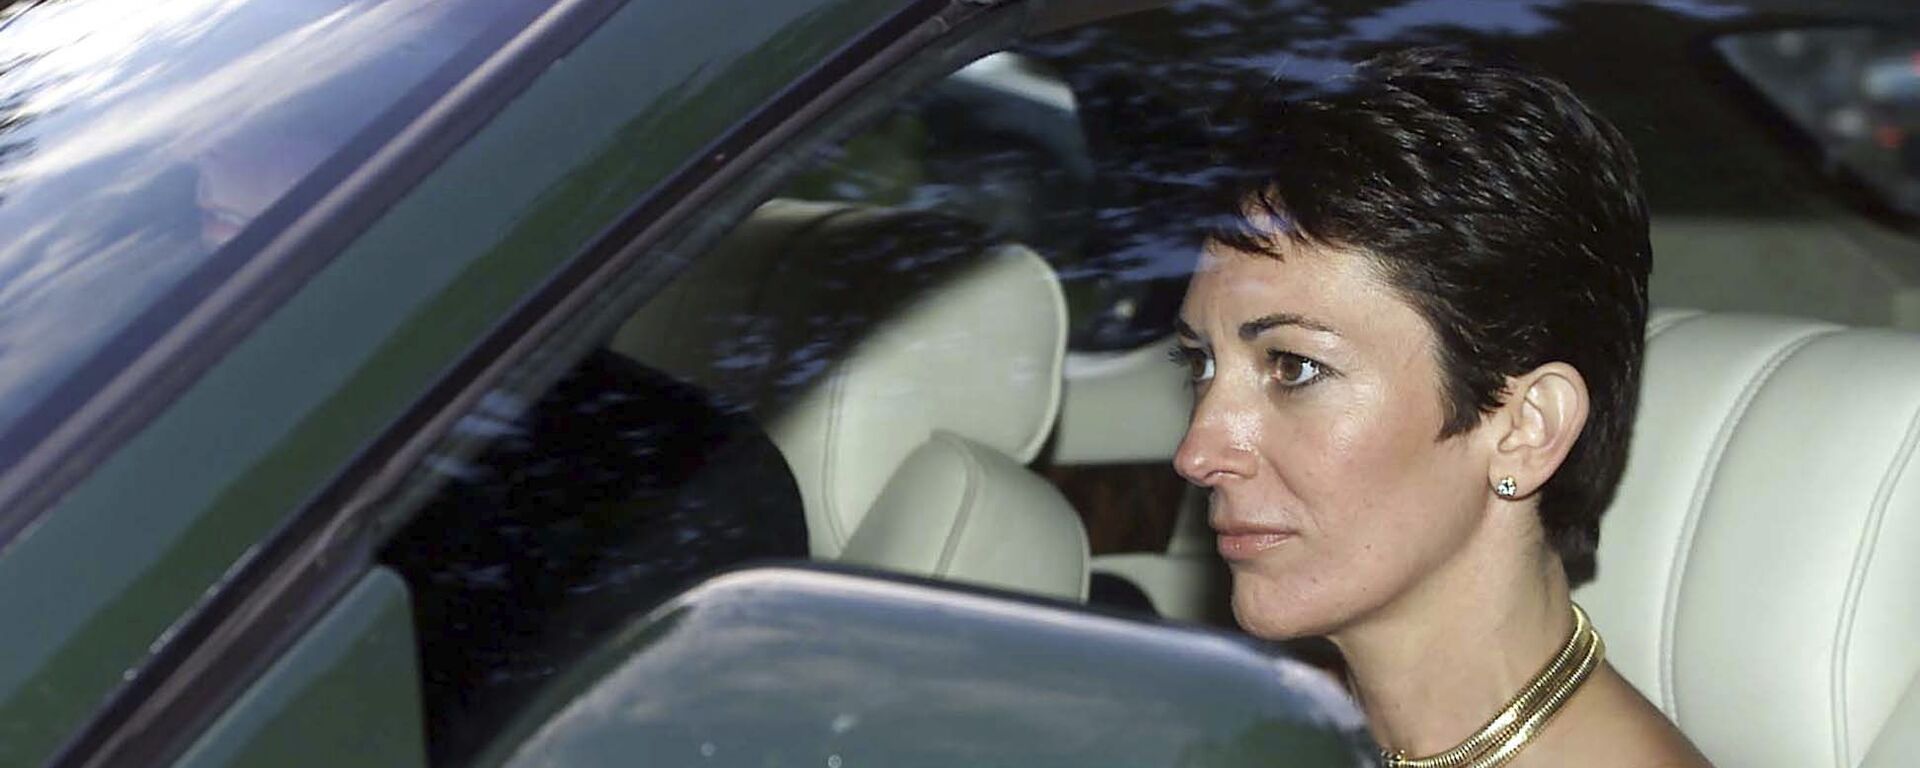 FILE - In this Sept. 2, 2000 file photo, British socialite Ghislaine Maxwell, driven by Britain's Prince Andrew leaves the wedding of a former girlfriend of the prince, Aurelia Cecil, at the Parish Church of St Michael in Compton Chamberlayne near Salisbury, England. The FBI said Thursday July 2, 2020, Ghislaine Maxwell, who was accused by many women of helping procure underage sex partners for Jeffrey Epstein, has been arrested in New Hampshire. - Sputnik International, 1920, 26.06.2022